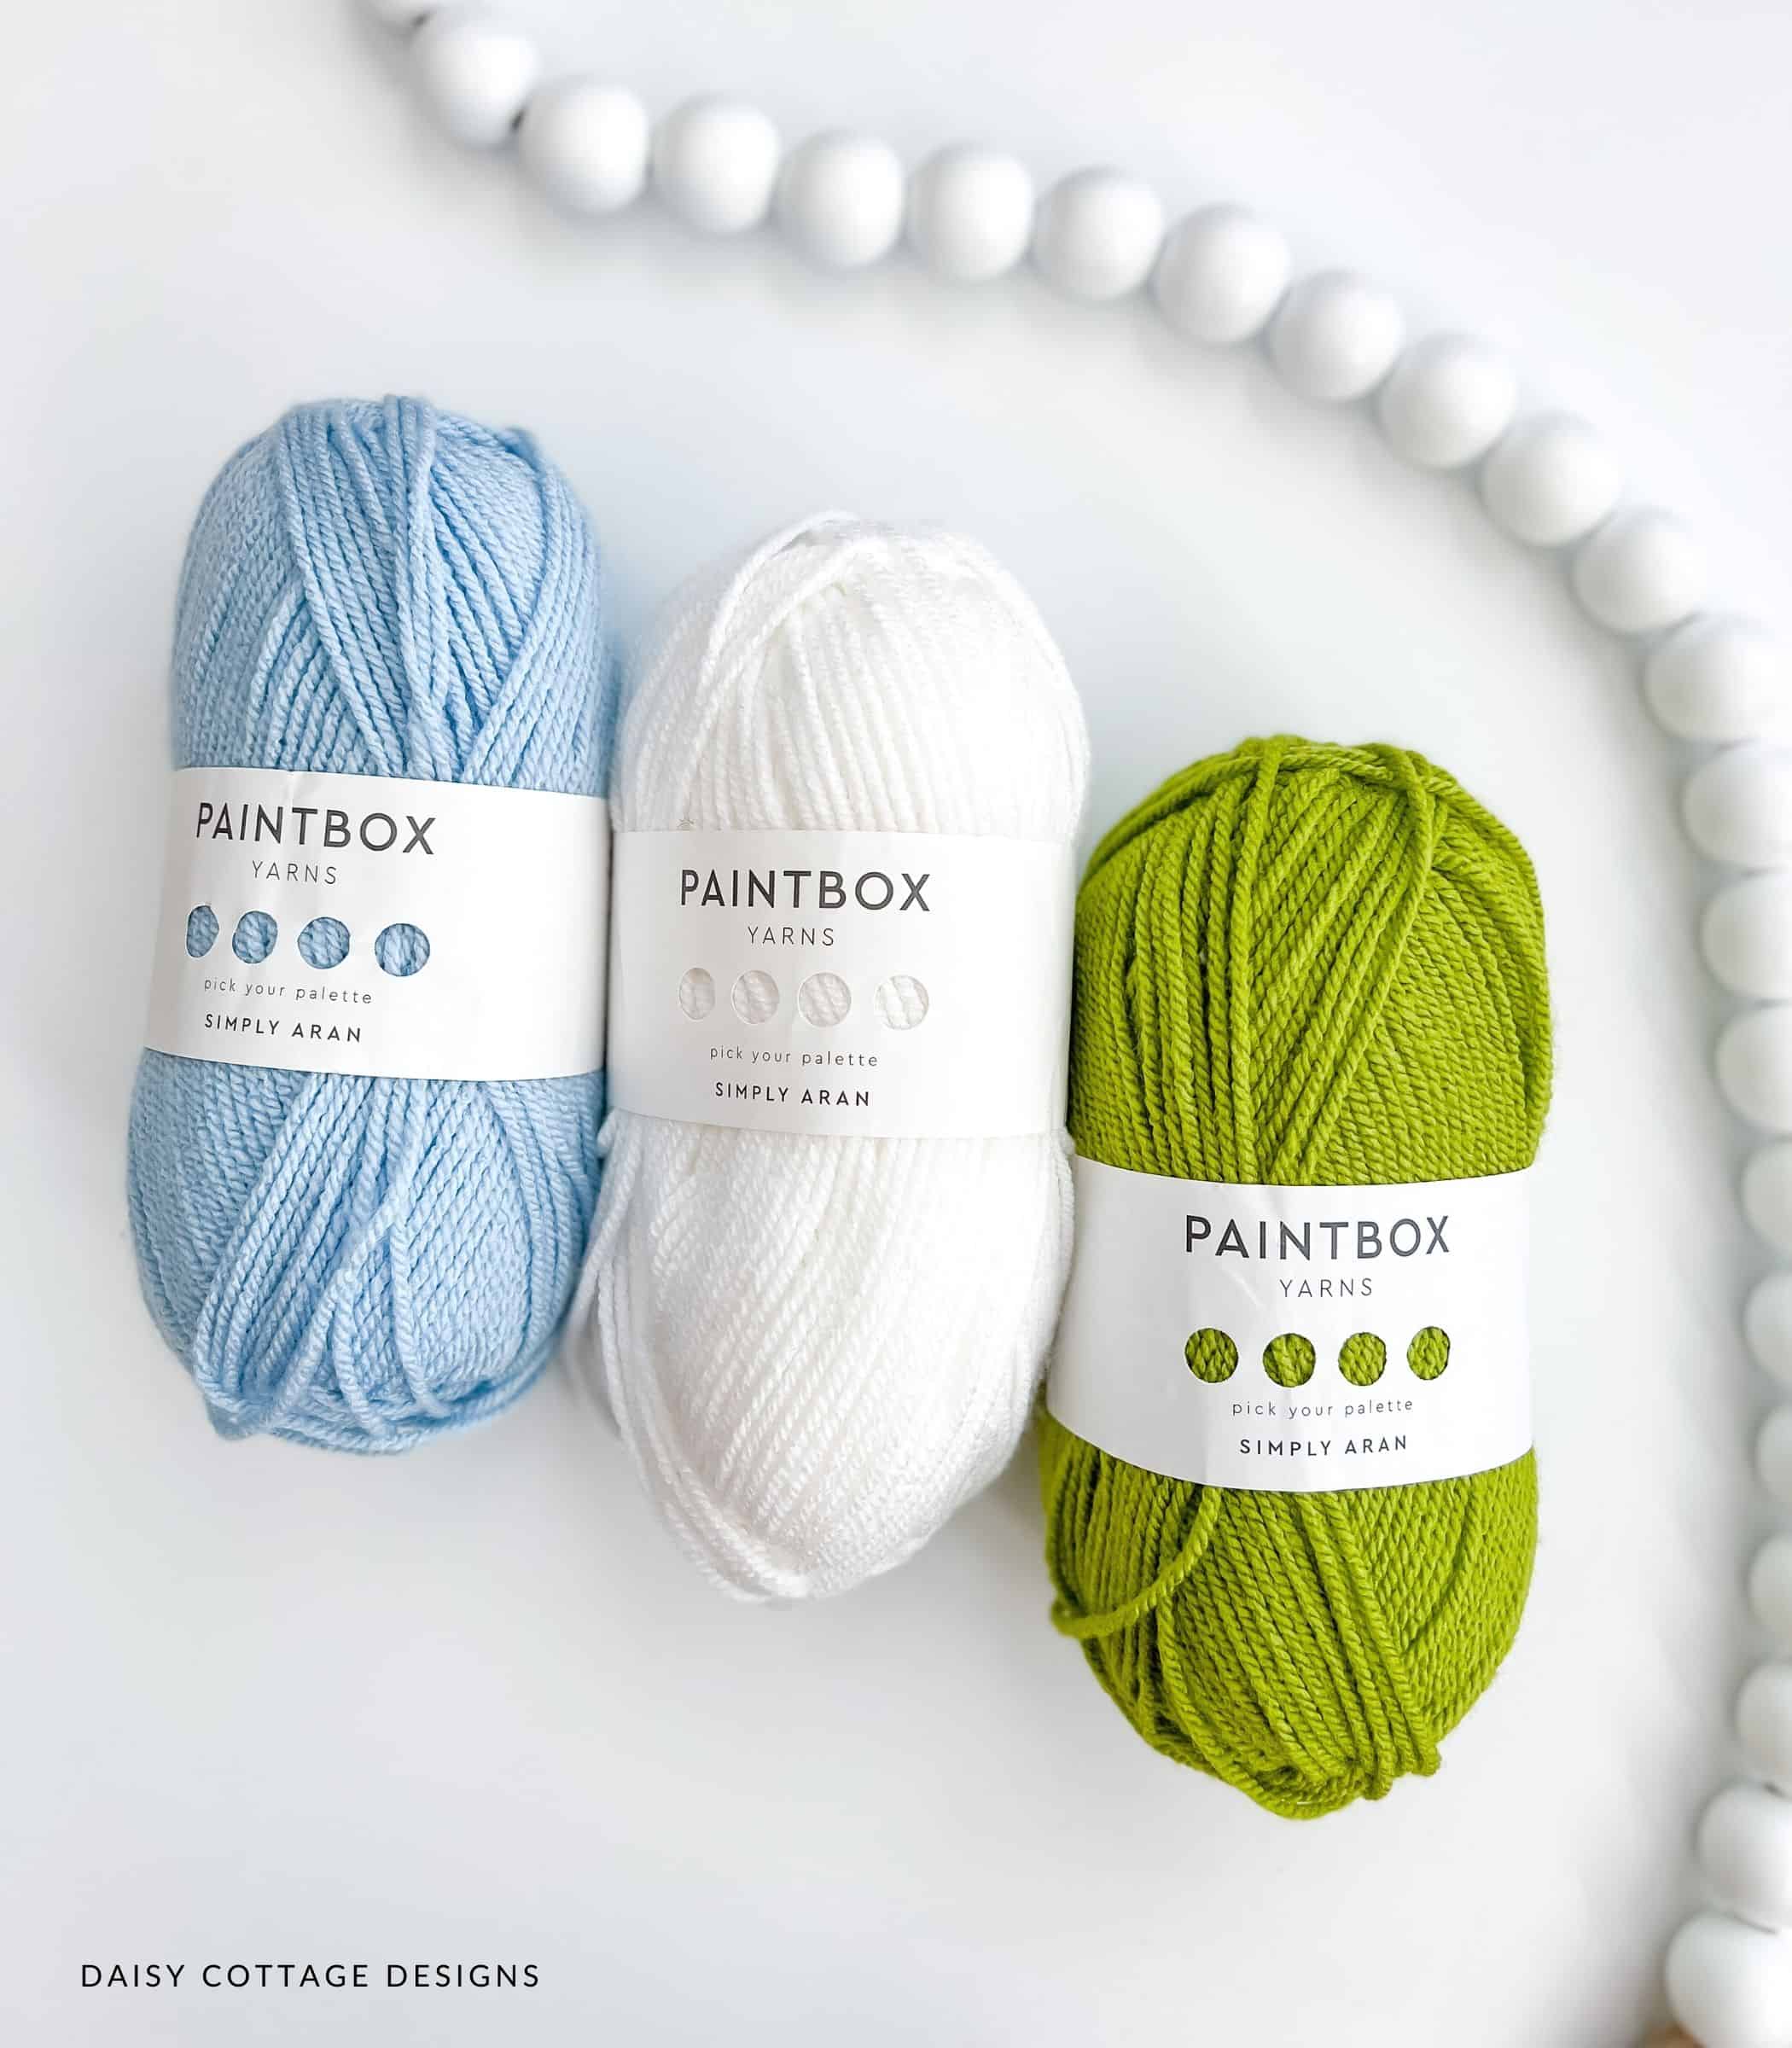 Blue, white, and green yarn